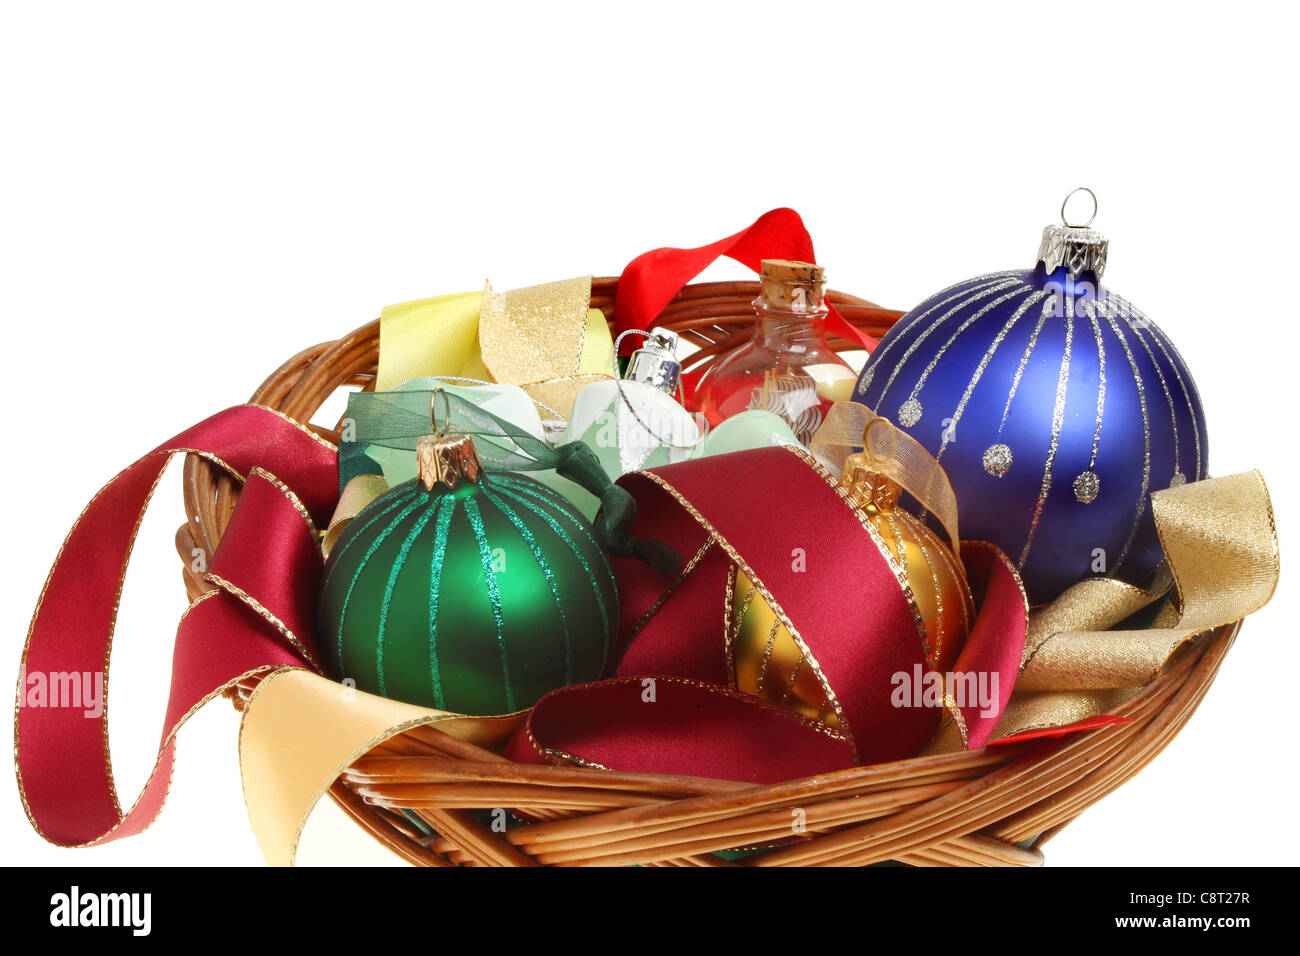 Christmas bauble decorations and ribbons in a basket against a white background Stock Photo